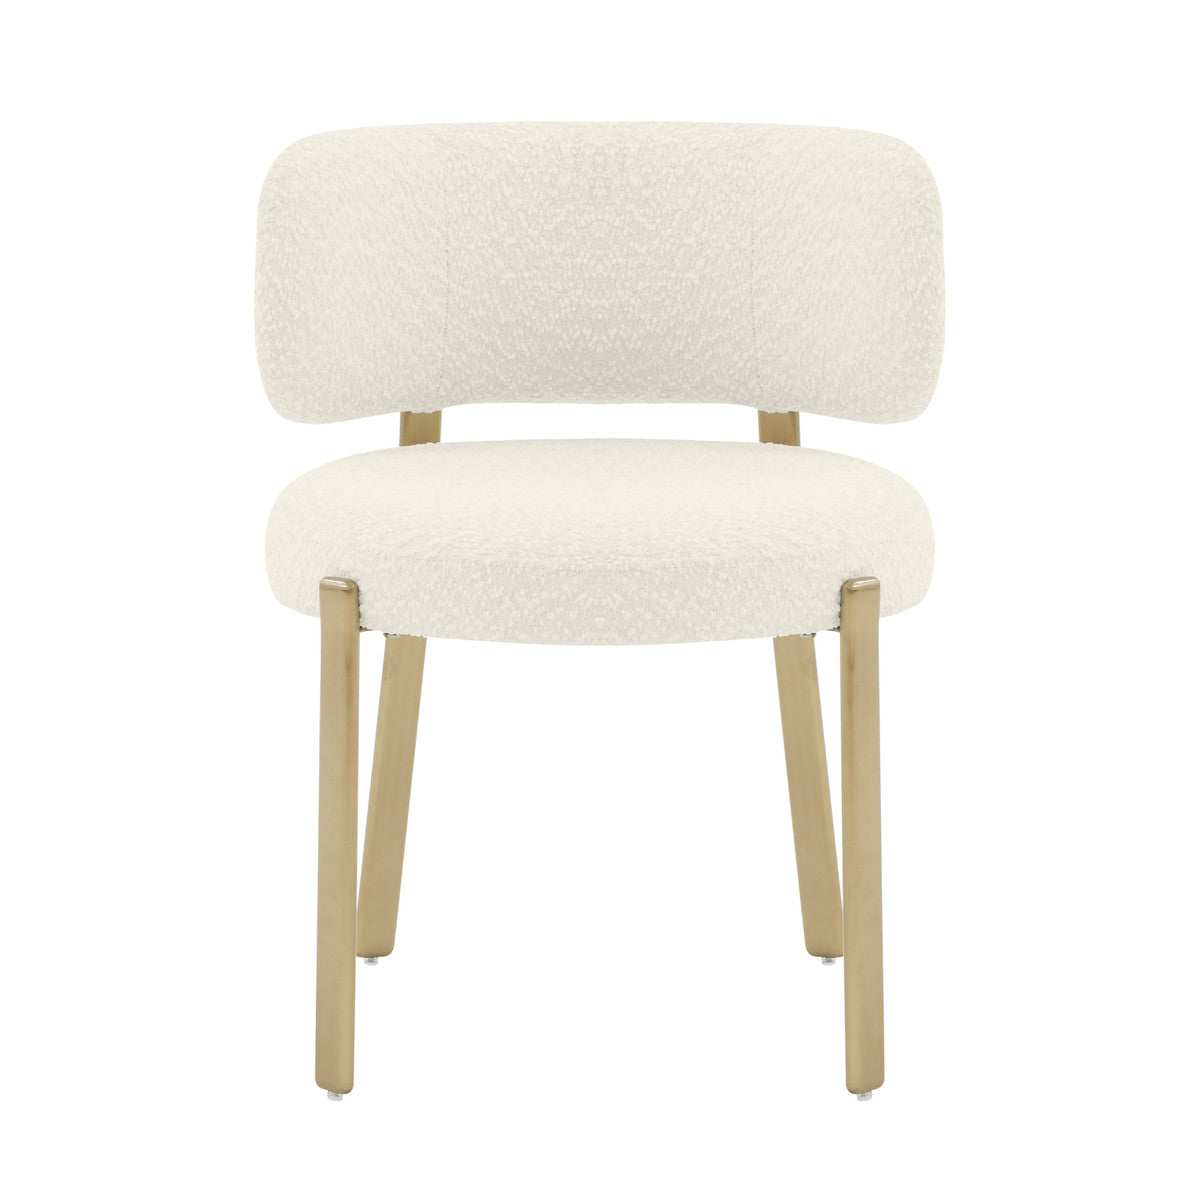 Havana Cream Boucle Dining Chair - Luxury Living Collection